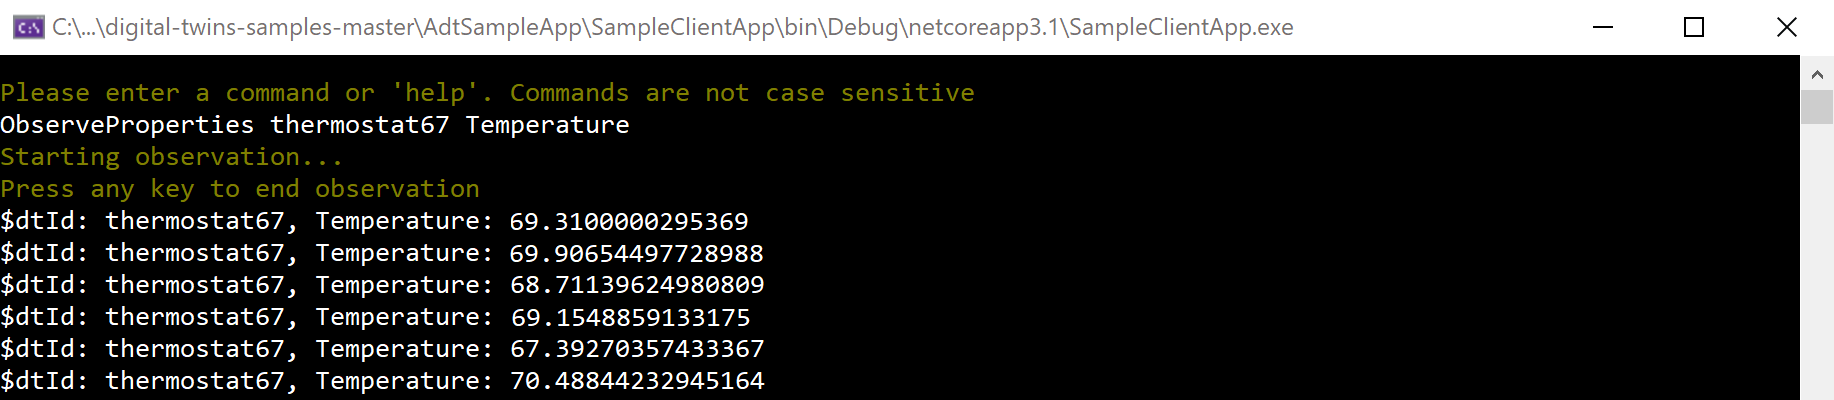 Screenshot of the console output showing log of temperature messages from digital twin thermostat67.